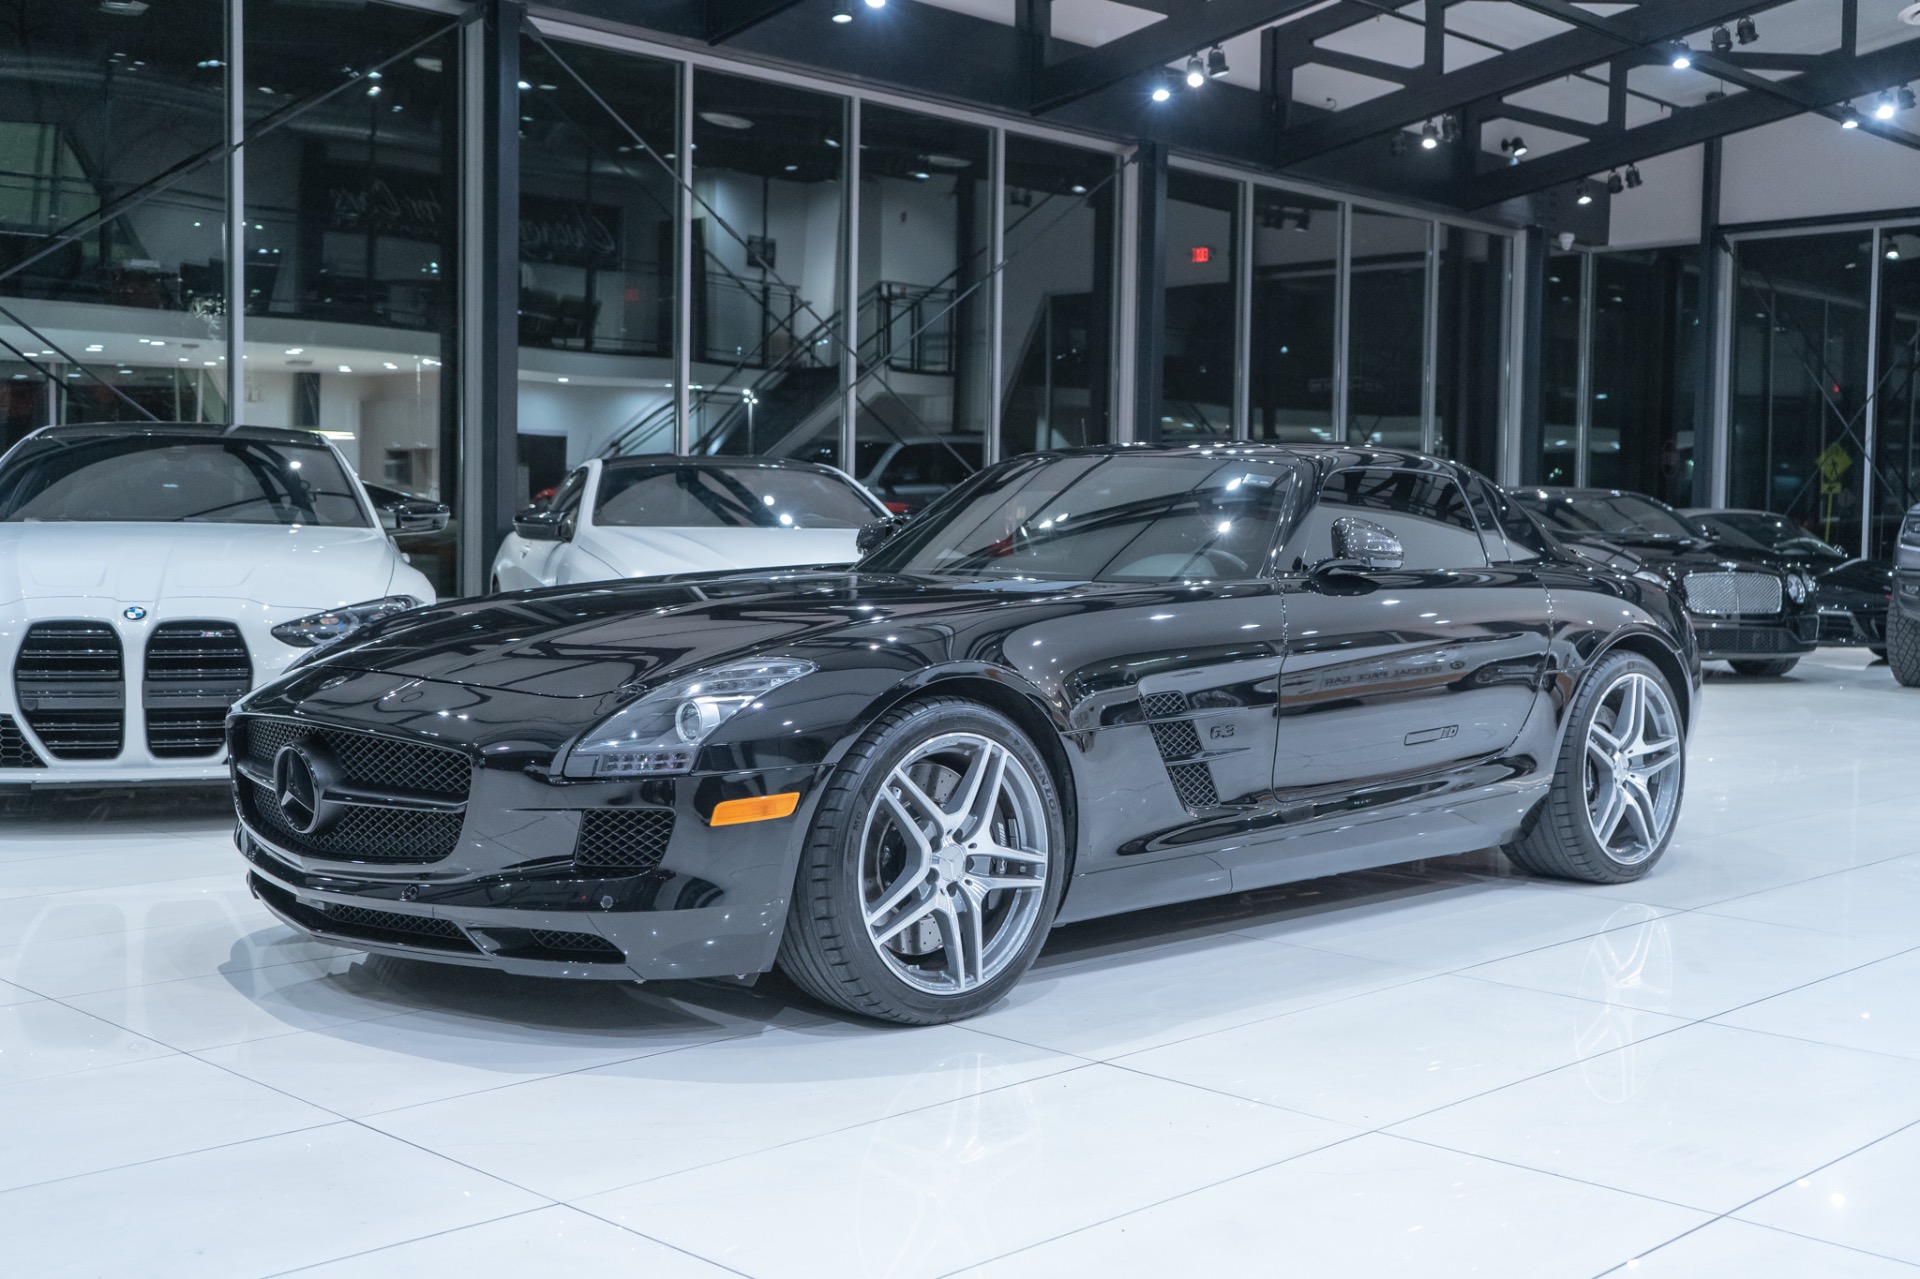 Used-2012-Mercedes-Benz-SLS-AMG-Coupe-Low-miles-RENNtech-Exhaust-Gullwing-Doors-Recent-Service